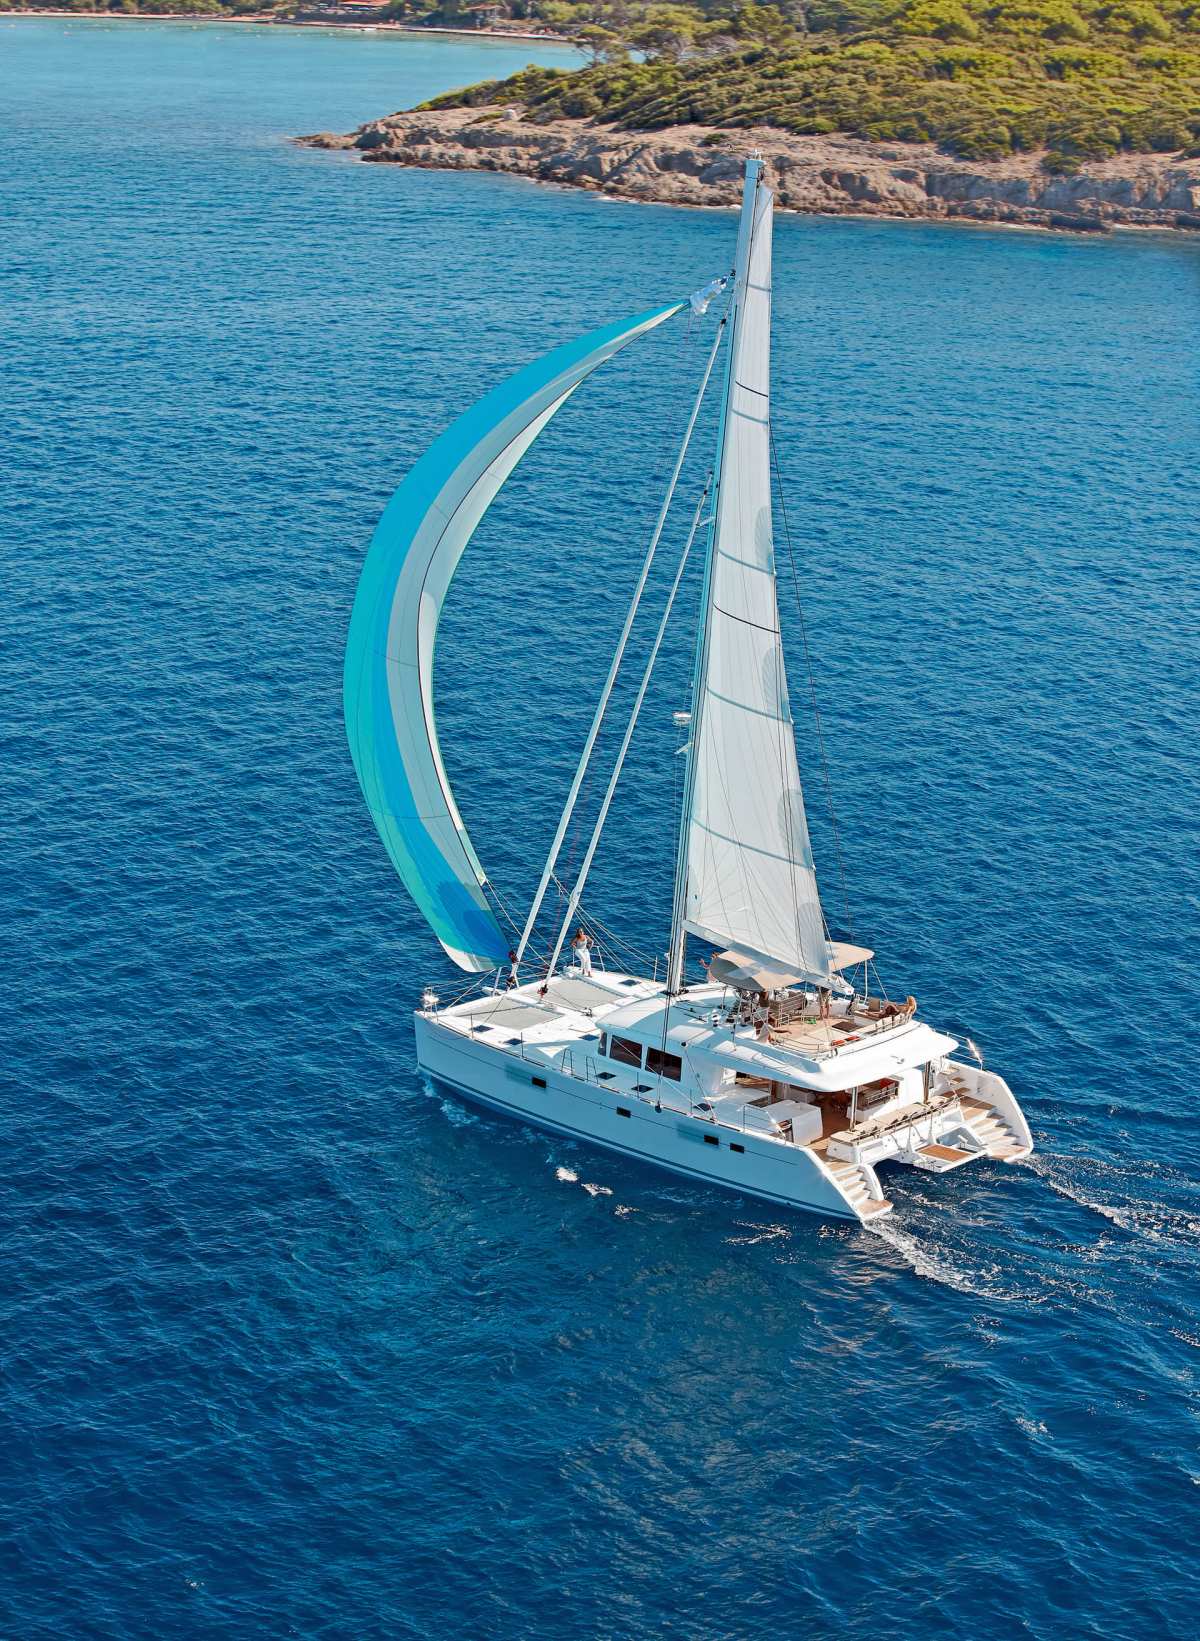 DADDY'S HOBBY Yacht Charter - Spinaker sailing in clear blue waters